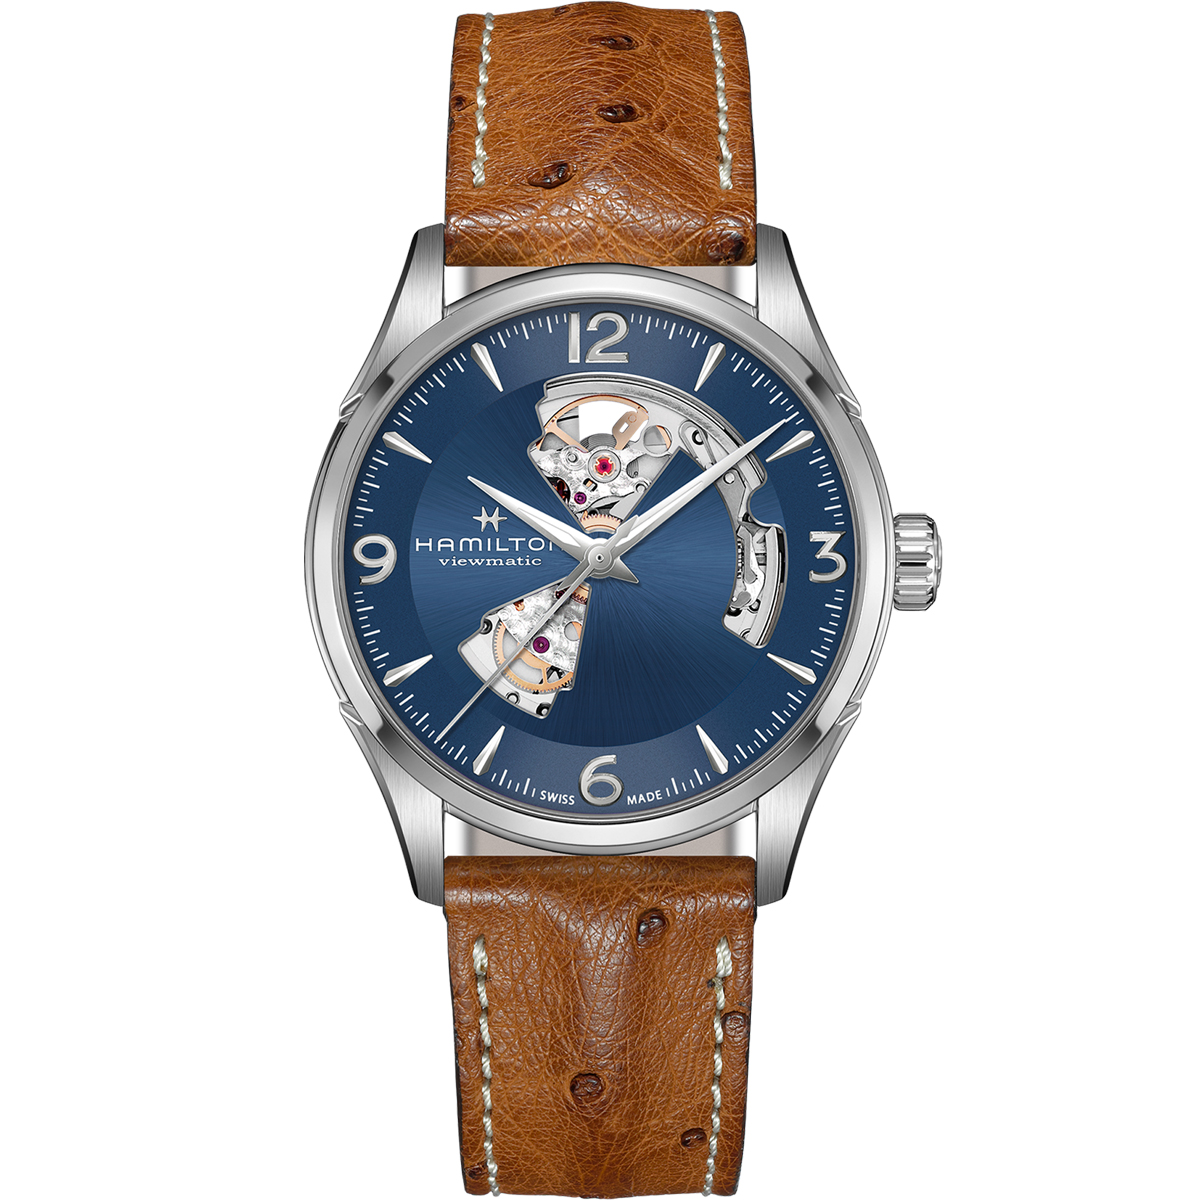 Hamilton Jazzmaster Open Heart Automatic 42mm Watch, navy and Silver